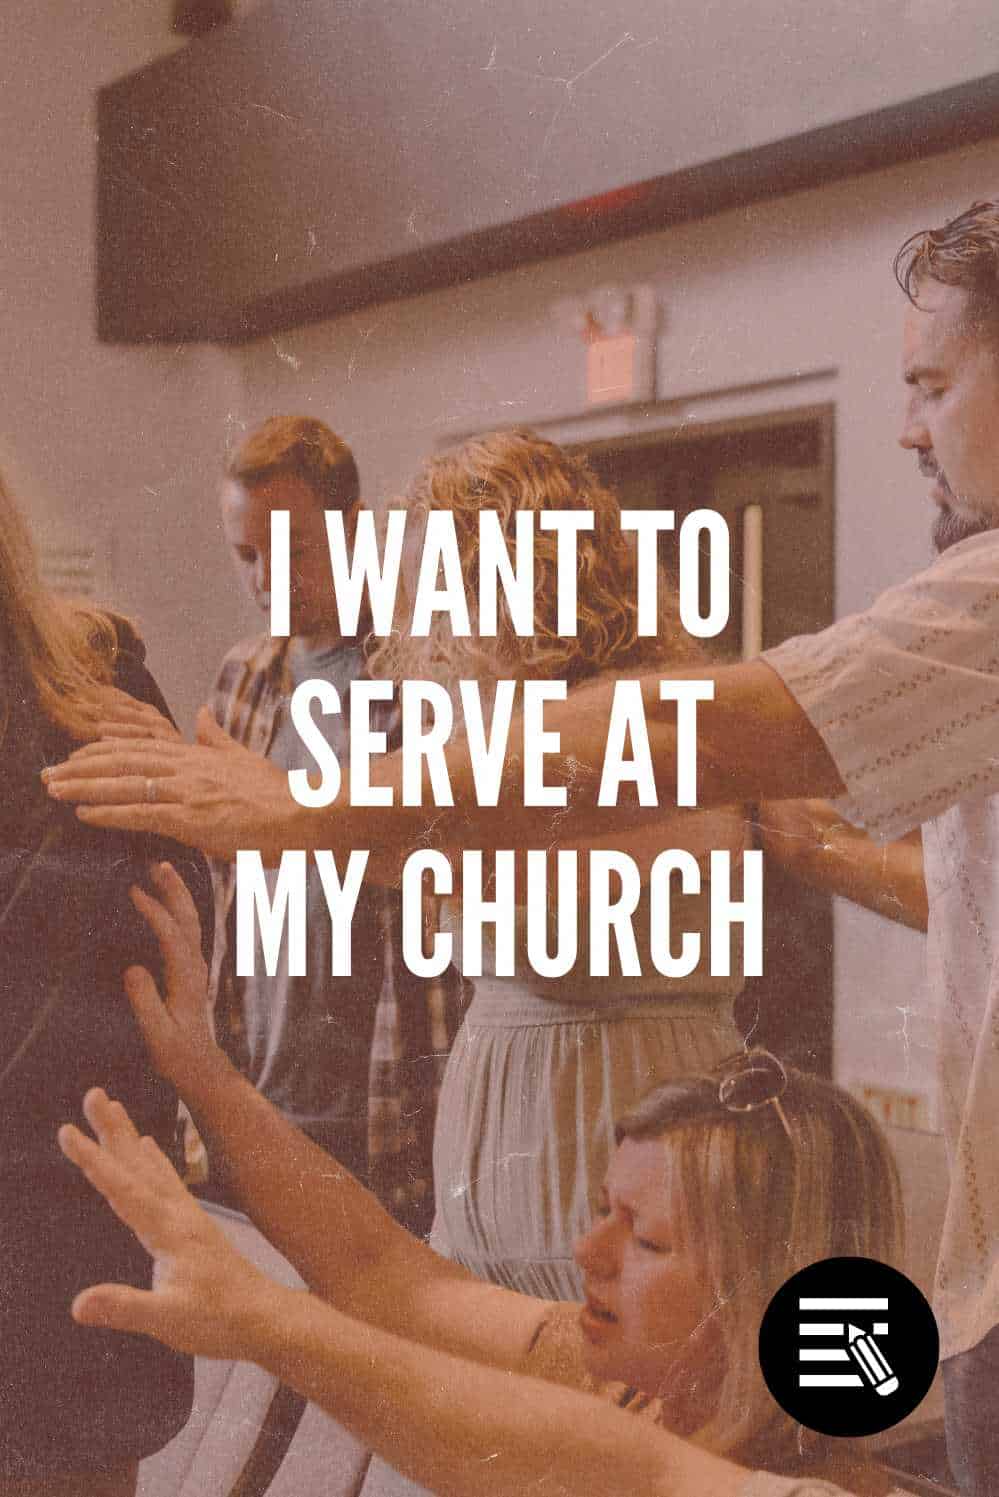  I want to serve at my church